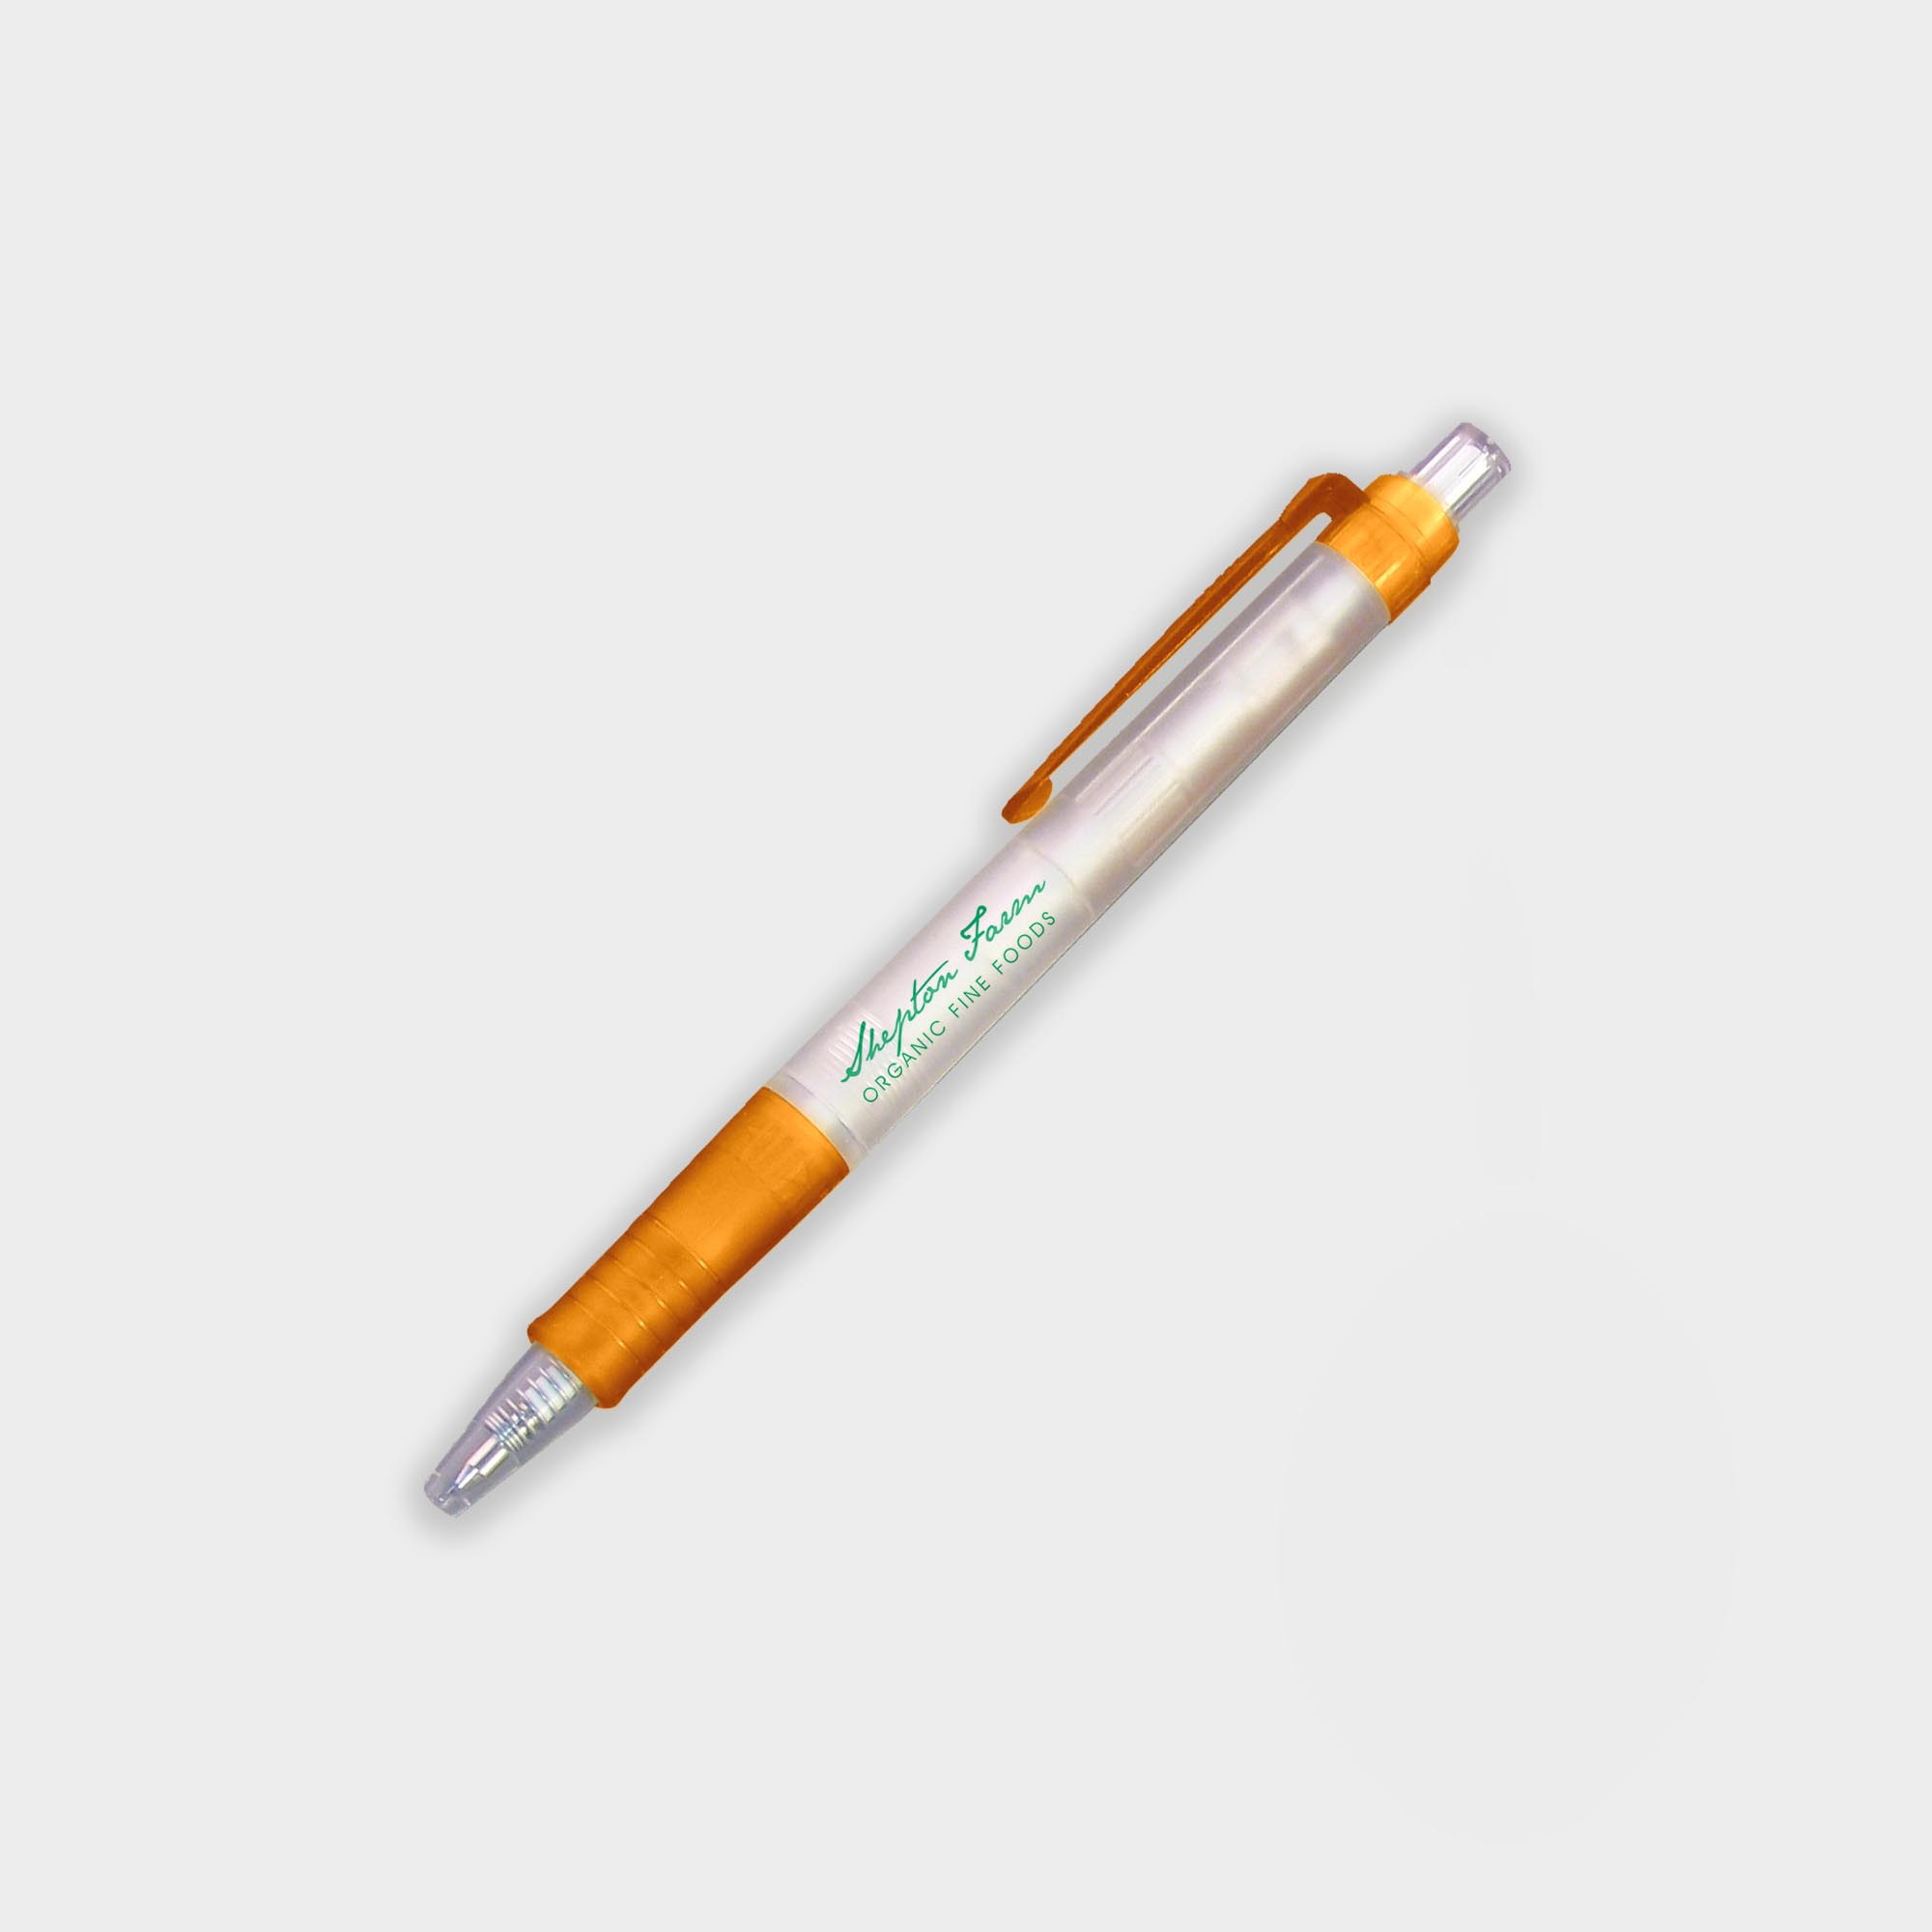 Promo Bio Pen Frosted